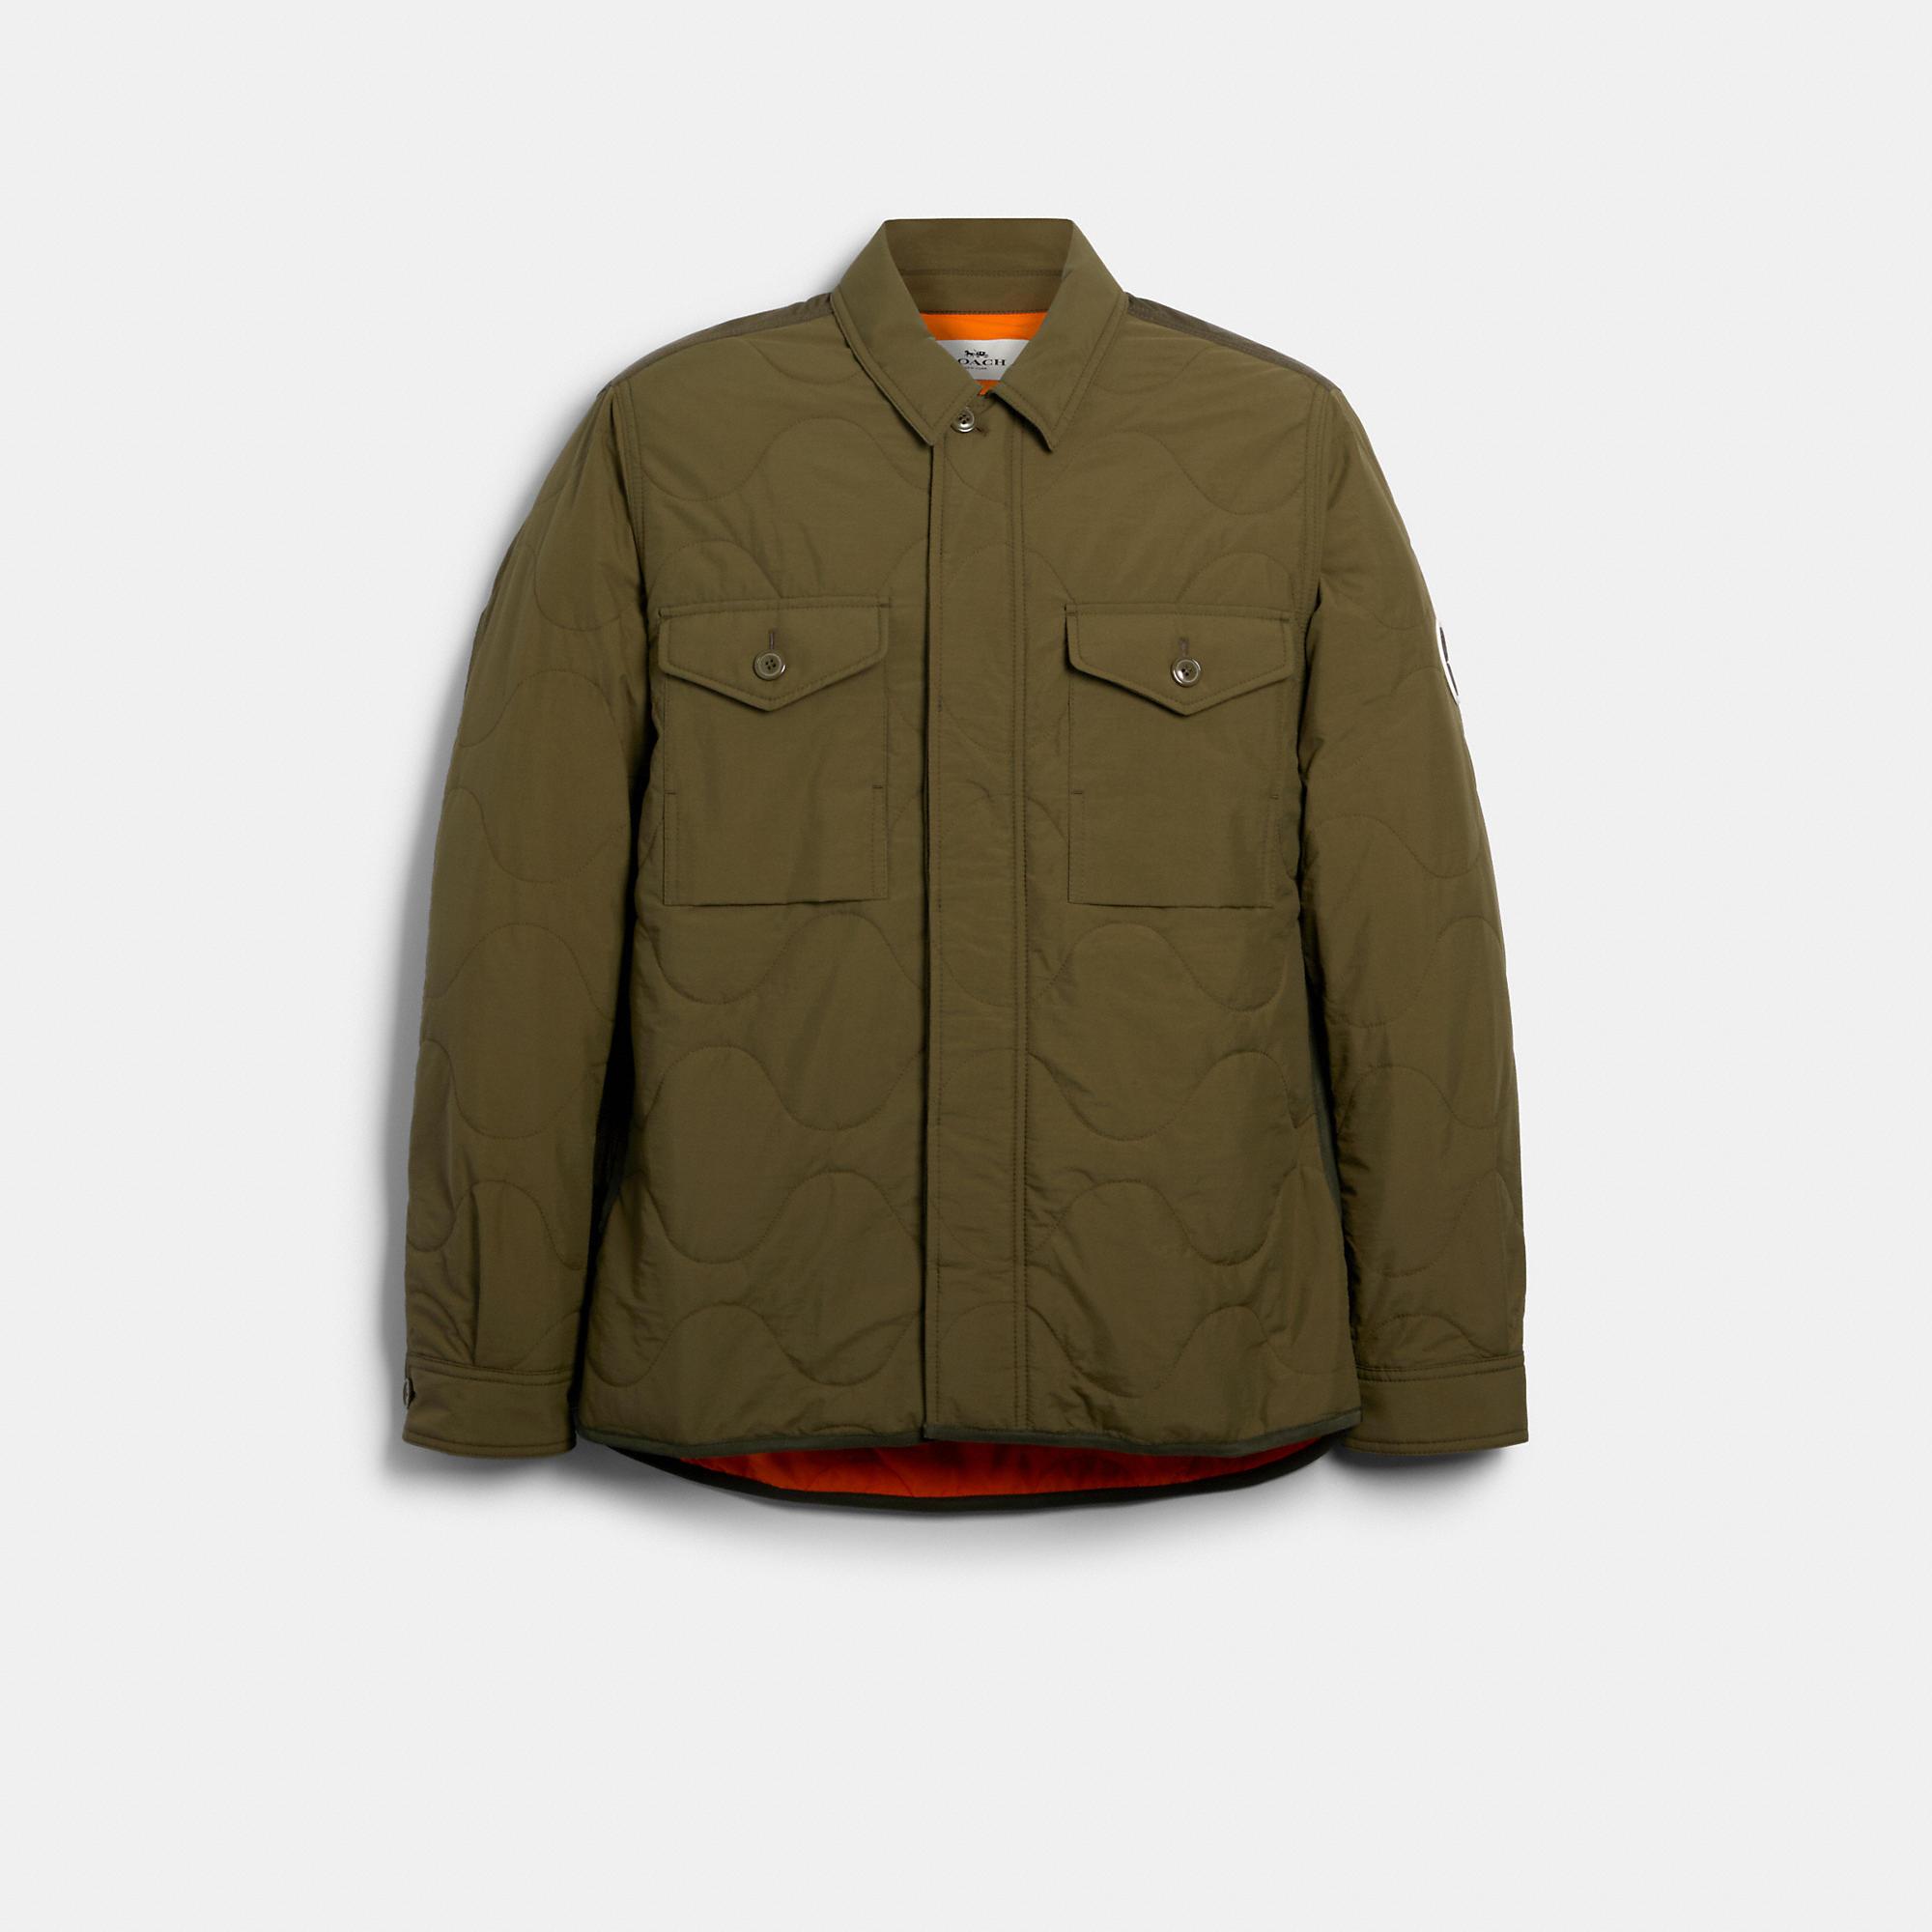 COACH Synthetic Quilted Shirt Jacket in Olive (Green) for Men - Lyst